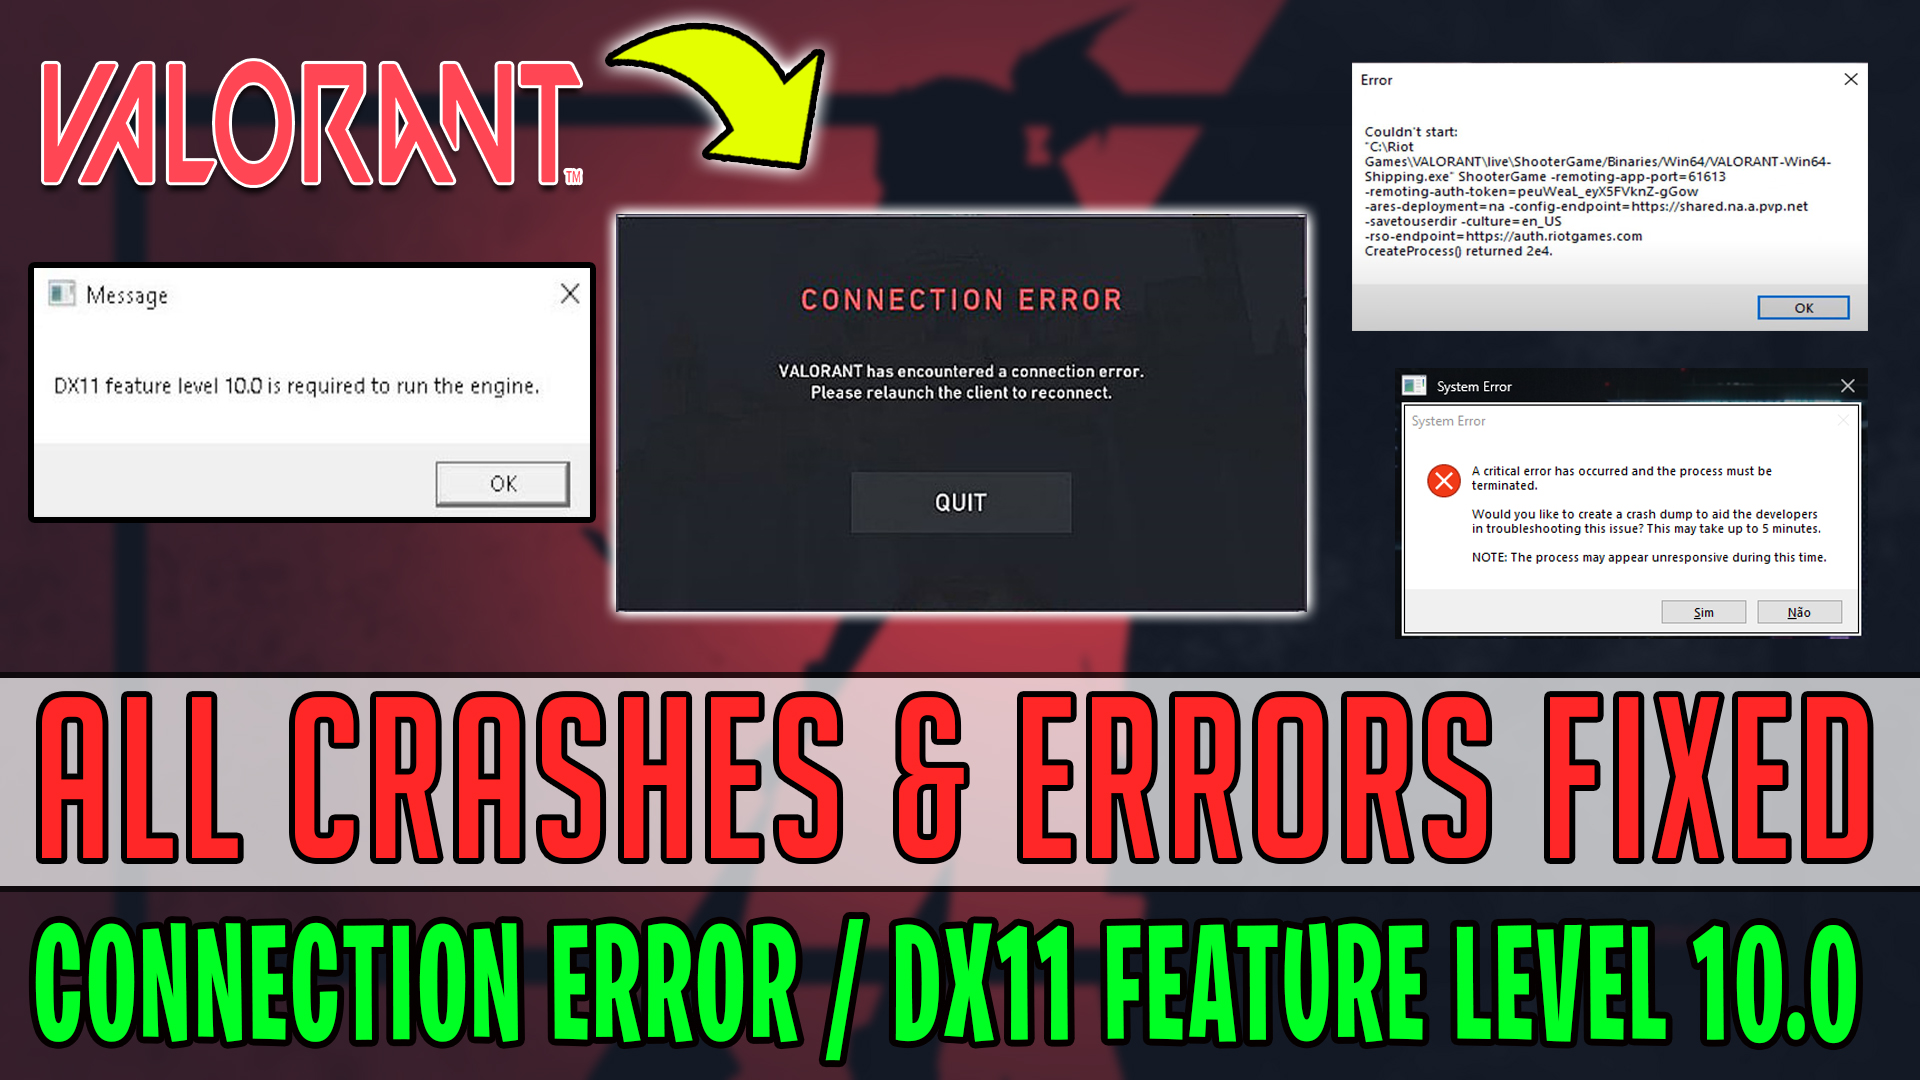 Dx11 feature 10.0 is required to Run the engine. Валорант dx11 feature Level 10.0 is required to Run the engine. DX 11 feature Level 10.0 is required Run the engine решение. Critical Error has occurred valorant. Dx11 feature